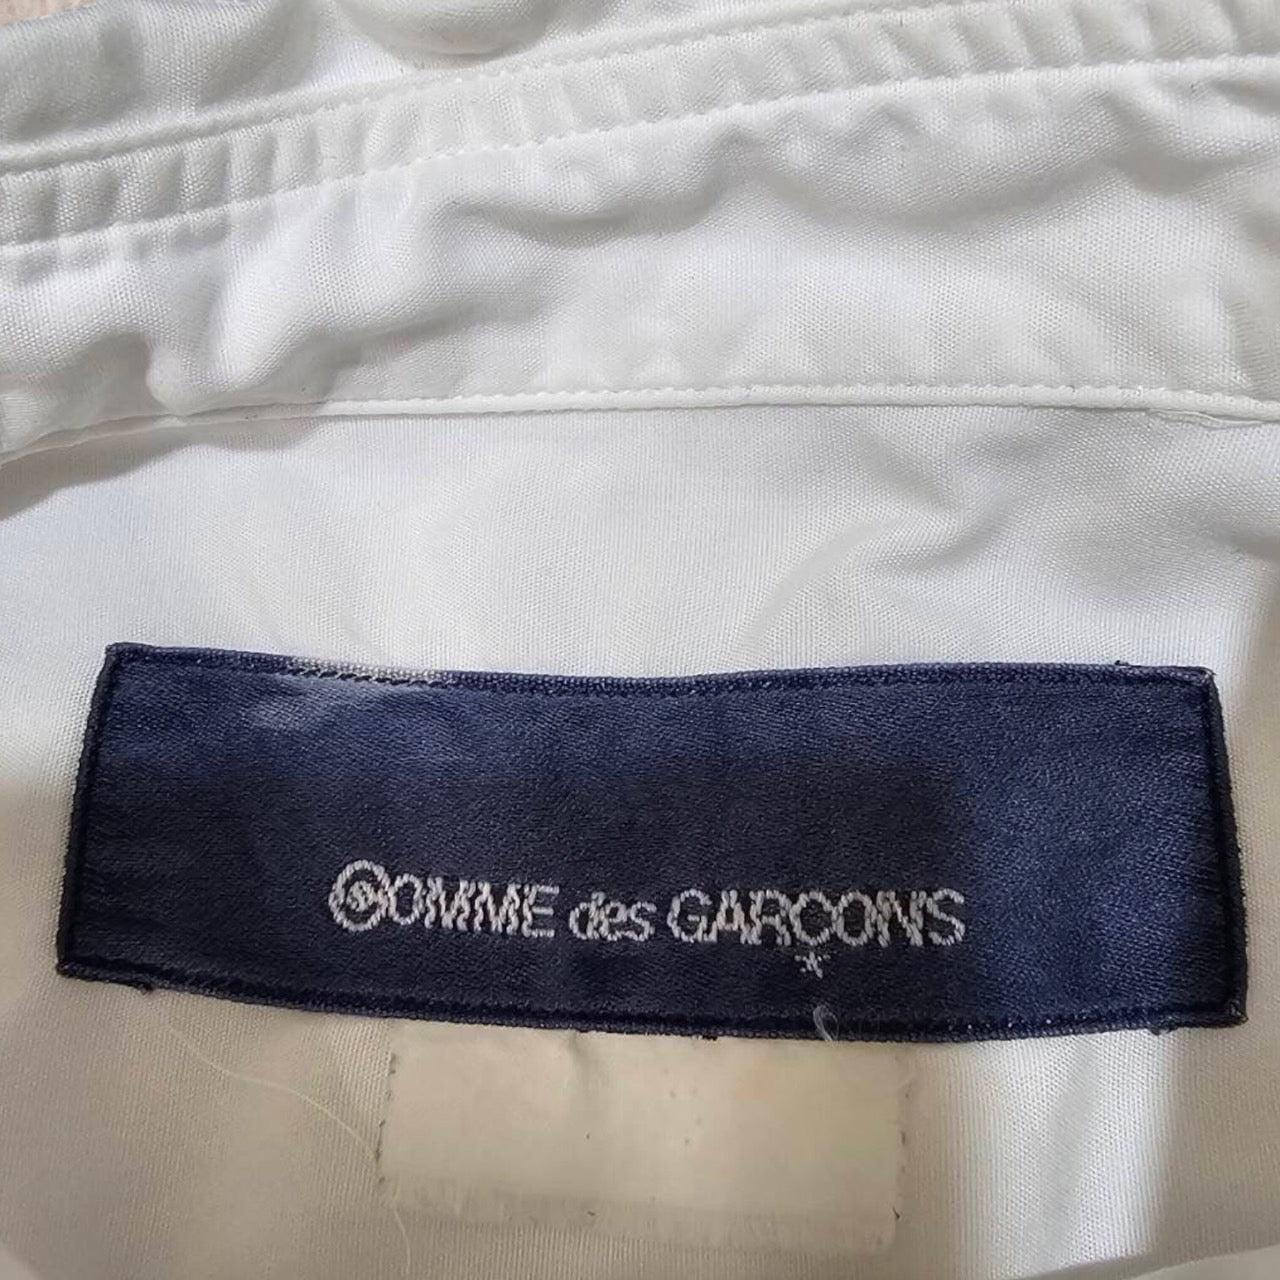 COMME des GARCONS(コムデギャルソン) 02's aoyama limited edition ...